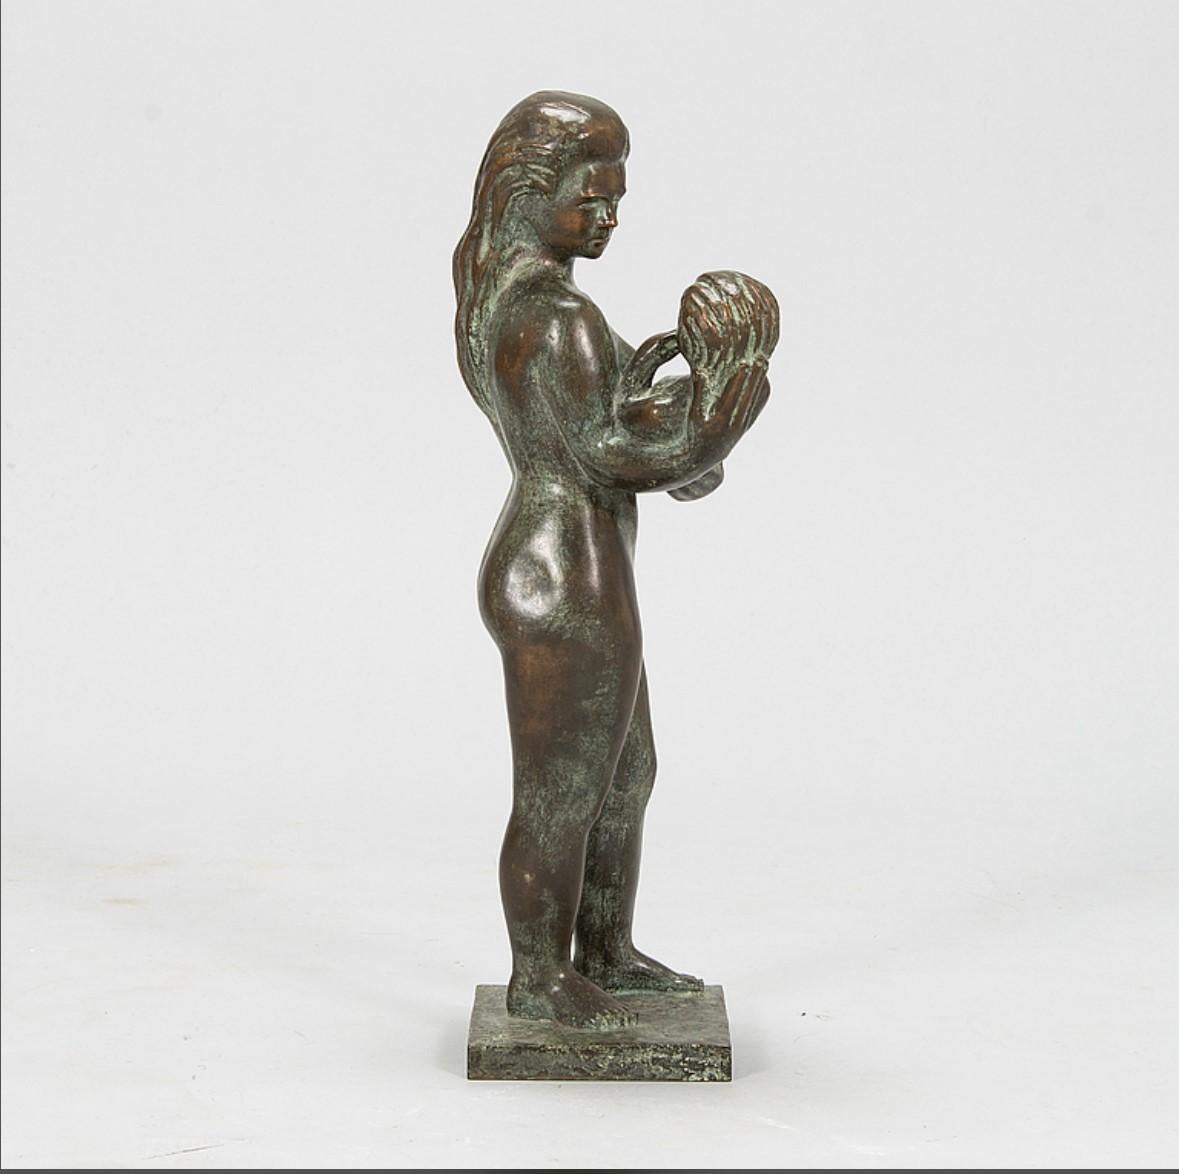 Mother and child - Gold Nude Sculpture by Teuvo Kotilainen